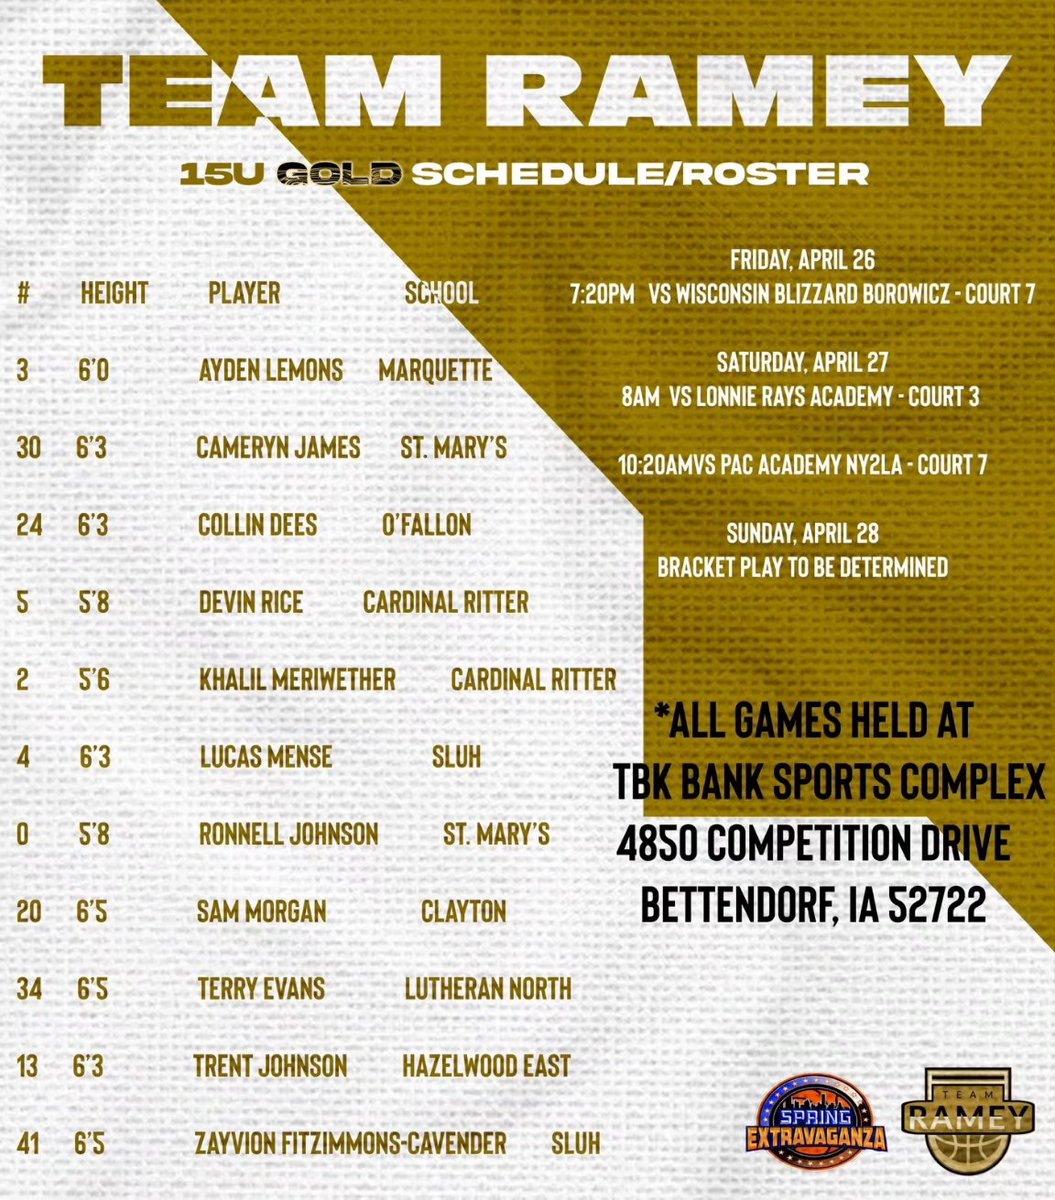 Team Ramey Gold Independent 15u, 16u & 17u teams head to Iowa this weekend to play in @ny2lasports Spring Extravaganza tournament. Incredible field & competition. Let's gooo #rameyaaufamily